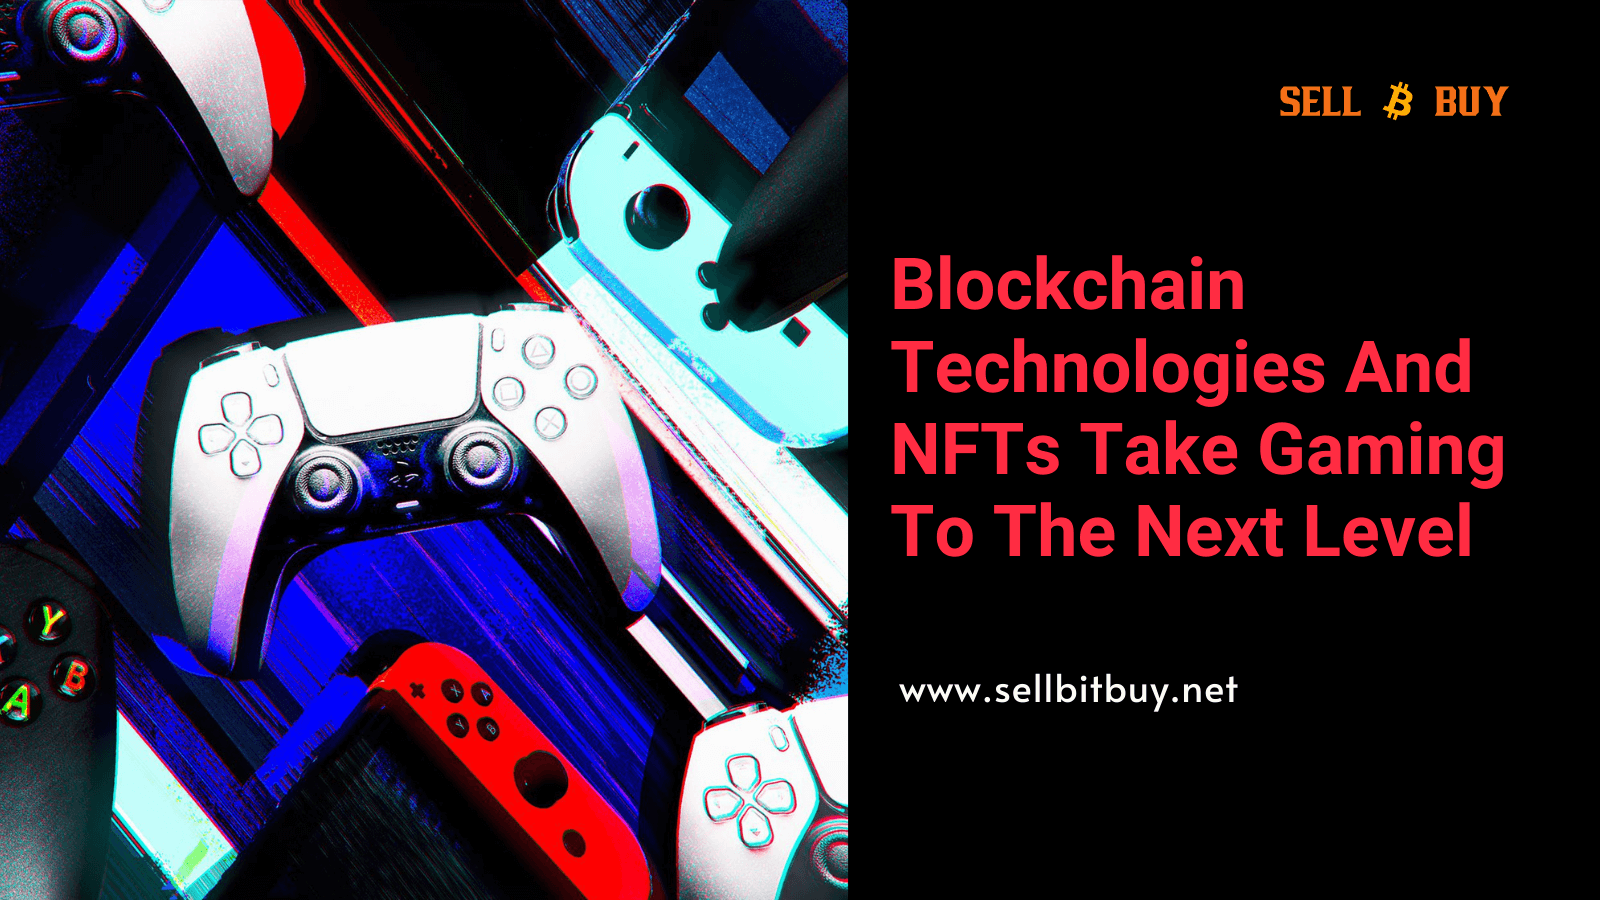 Article about Blockchain Technologies And NFTs Take Gaming To The Next Level